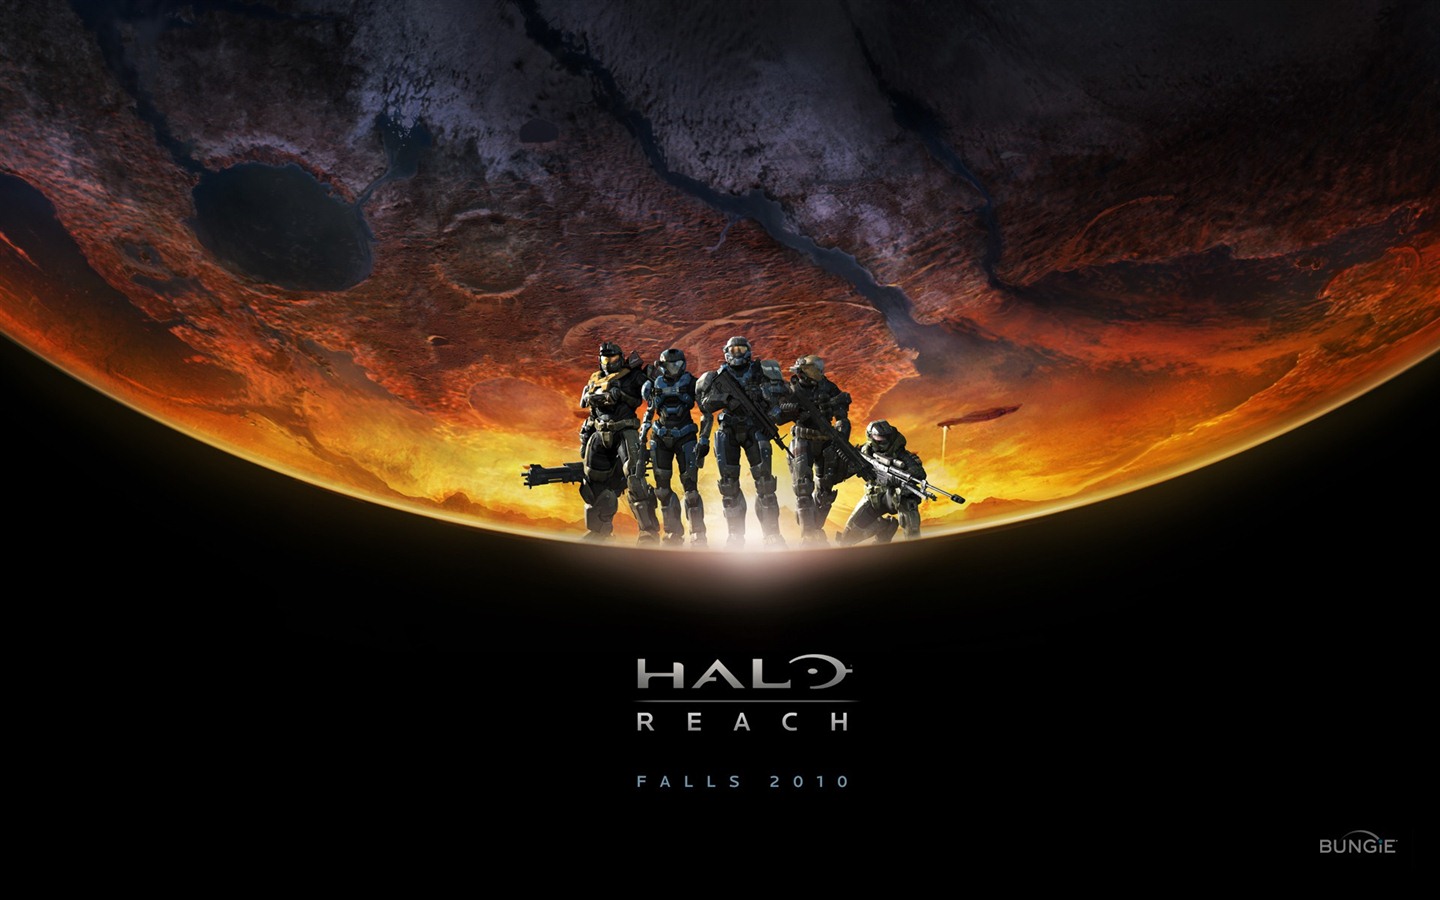 Halo game HD wallpapers #27 - 1440x900